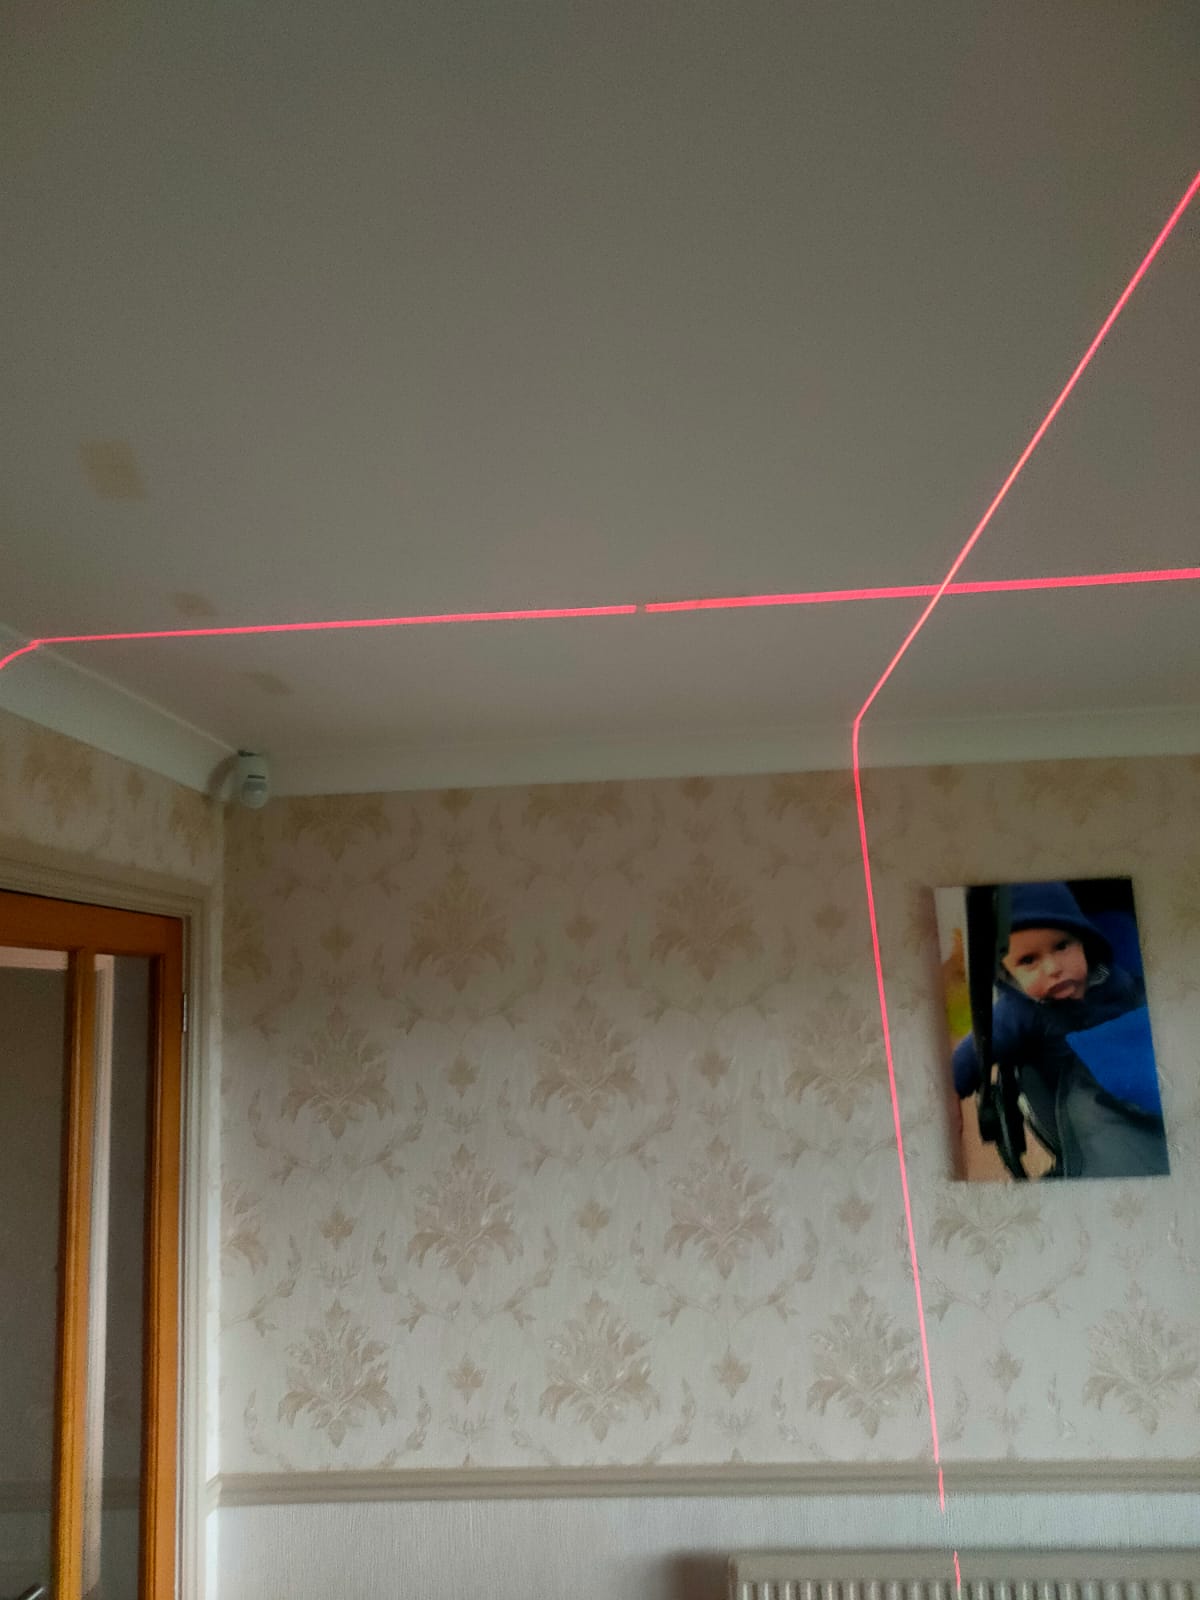 Using a laser level we marked along the lines, using masking tape to see where the lights will go